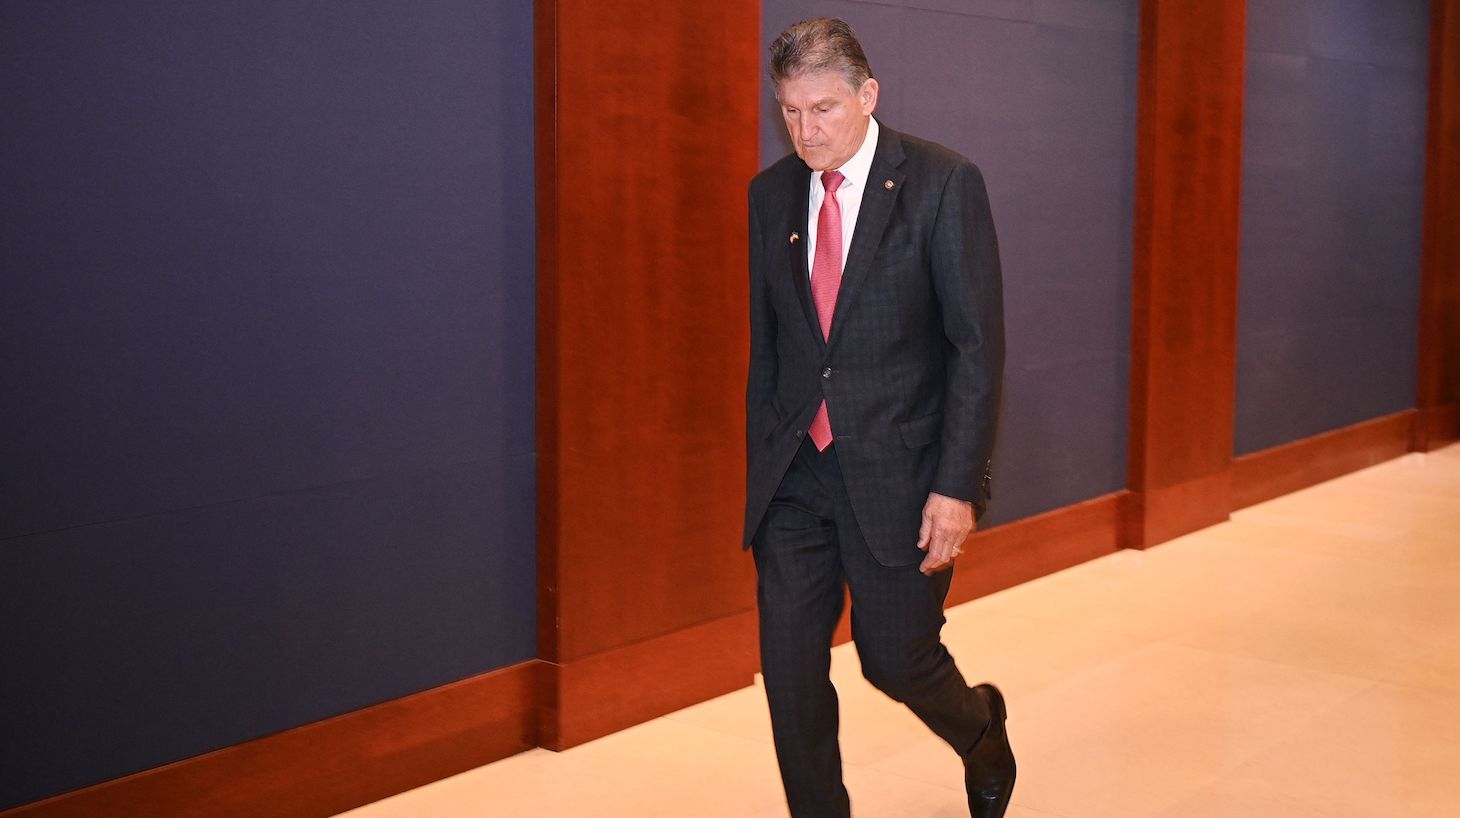 Senator Joe Manchin, D-WV, departs after attending Ukraine President Volodymyr Zelensky's video joint address to Congress in the Congressional Auditorium at the US Capitol in Washington, DC on March 16, 2022. (Photo by MANDEL NGAN / AFP) (Photo by MANDEL NGAN/AFP via Getty Images)